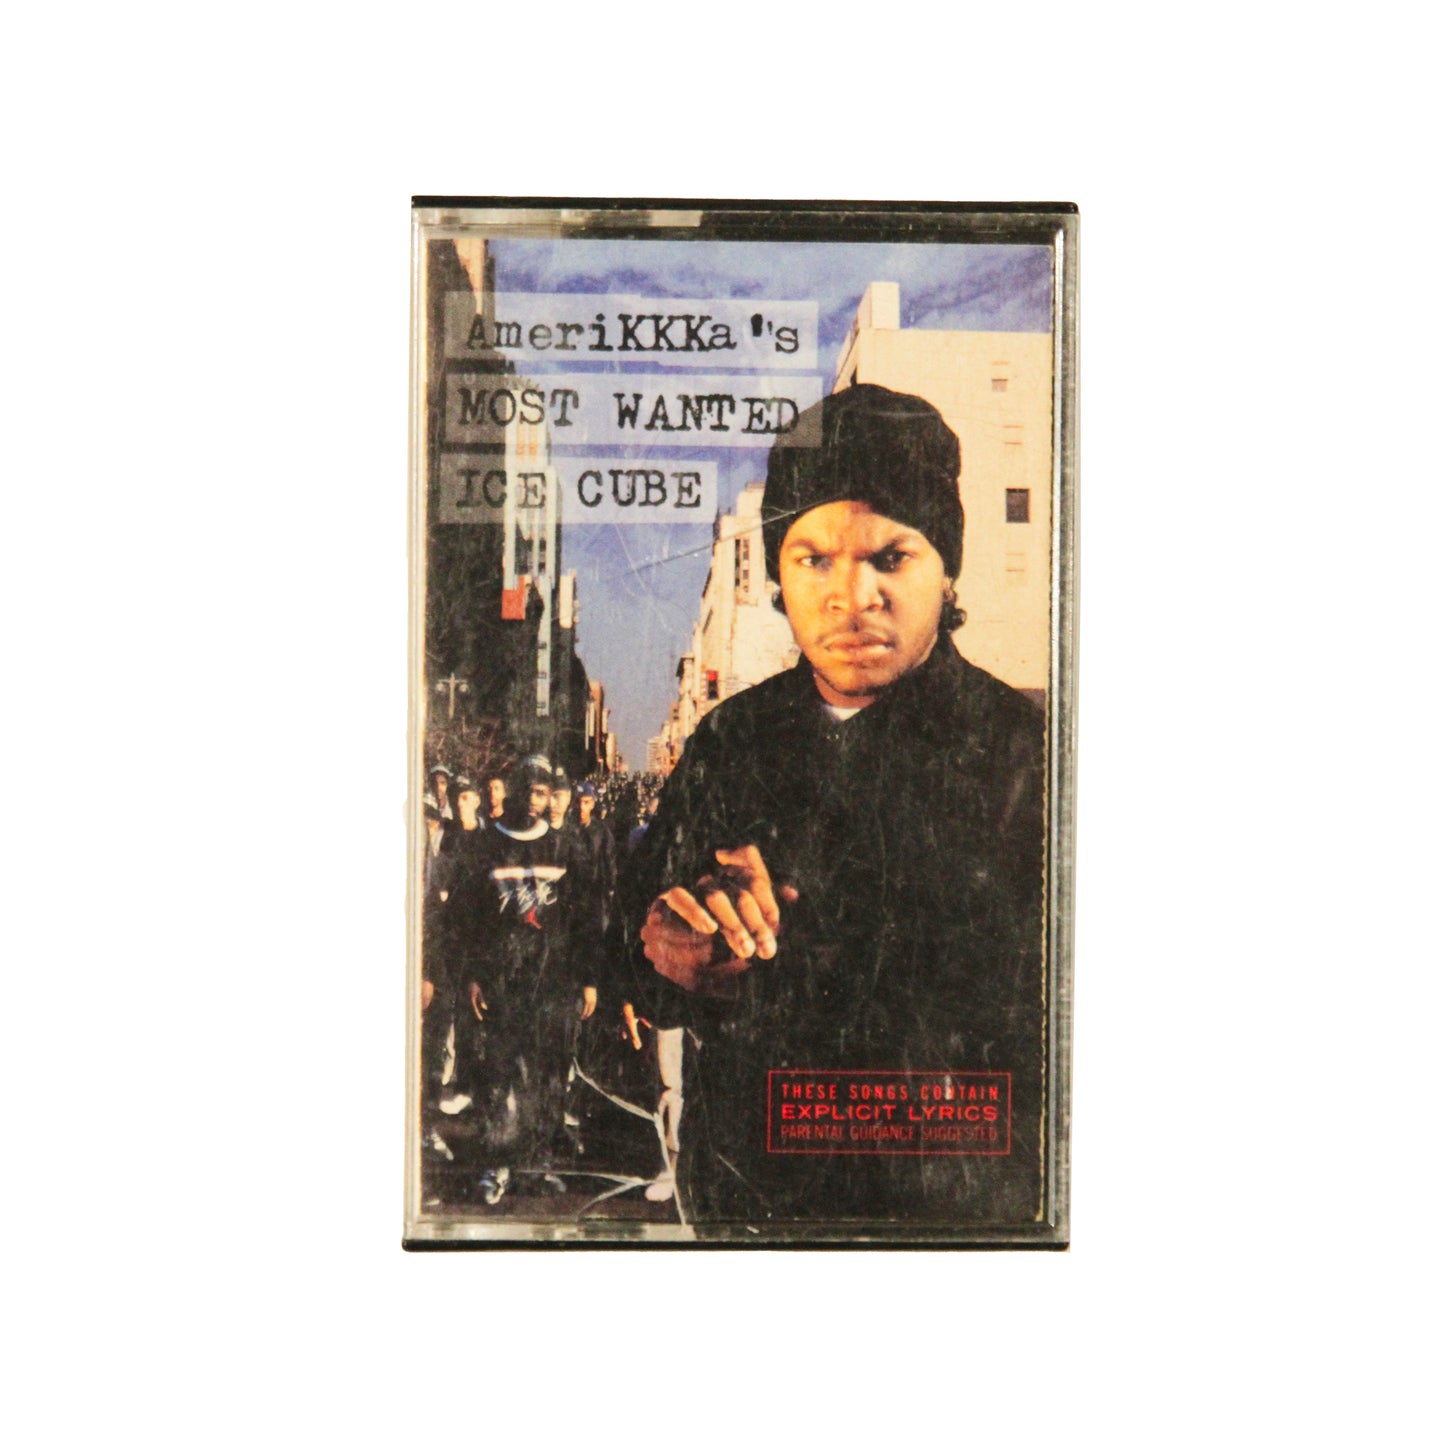 Ice Cube “AmeriKKKa’s Most Wanted” Cassette